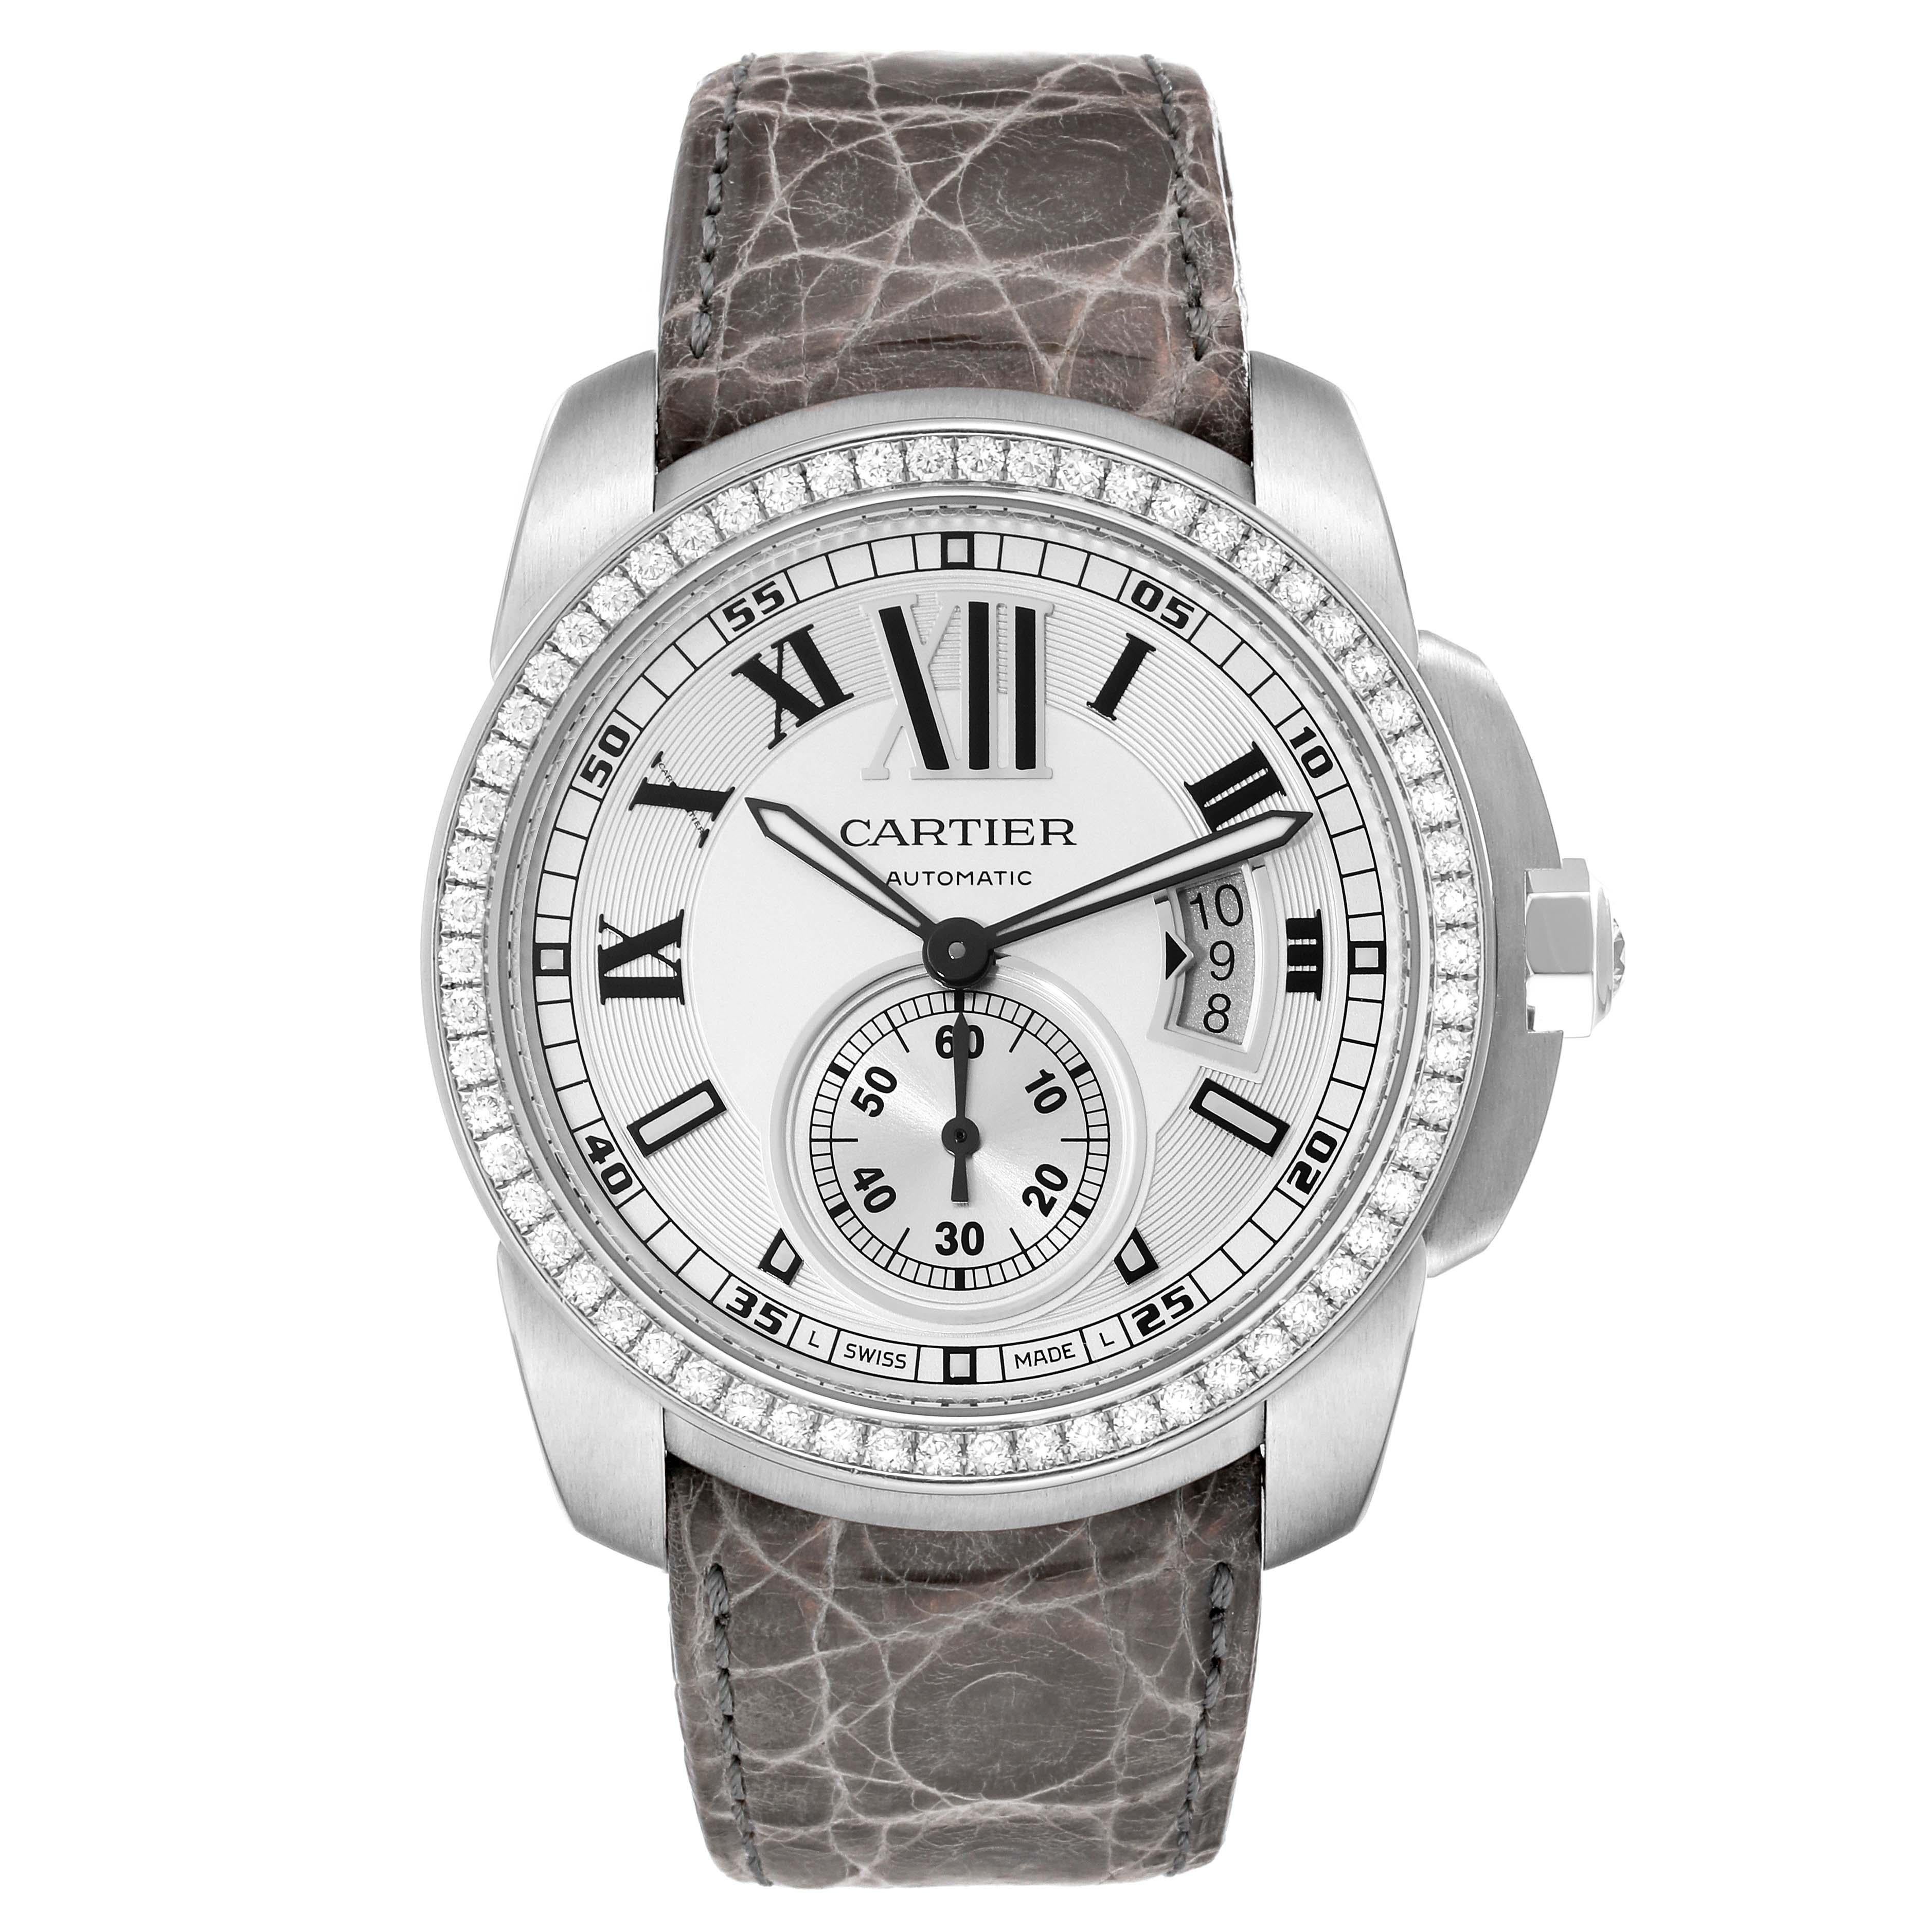 Cartier Calibre Silver Dial White Gold Diamond Mens Watch WF100003. Automatic self-winding movement. 18k white gold case 42.0 mm in diameter. 18K white gold crown set with an original Cartier factory diamond.  Transparent exhibition sapphire crystal